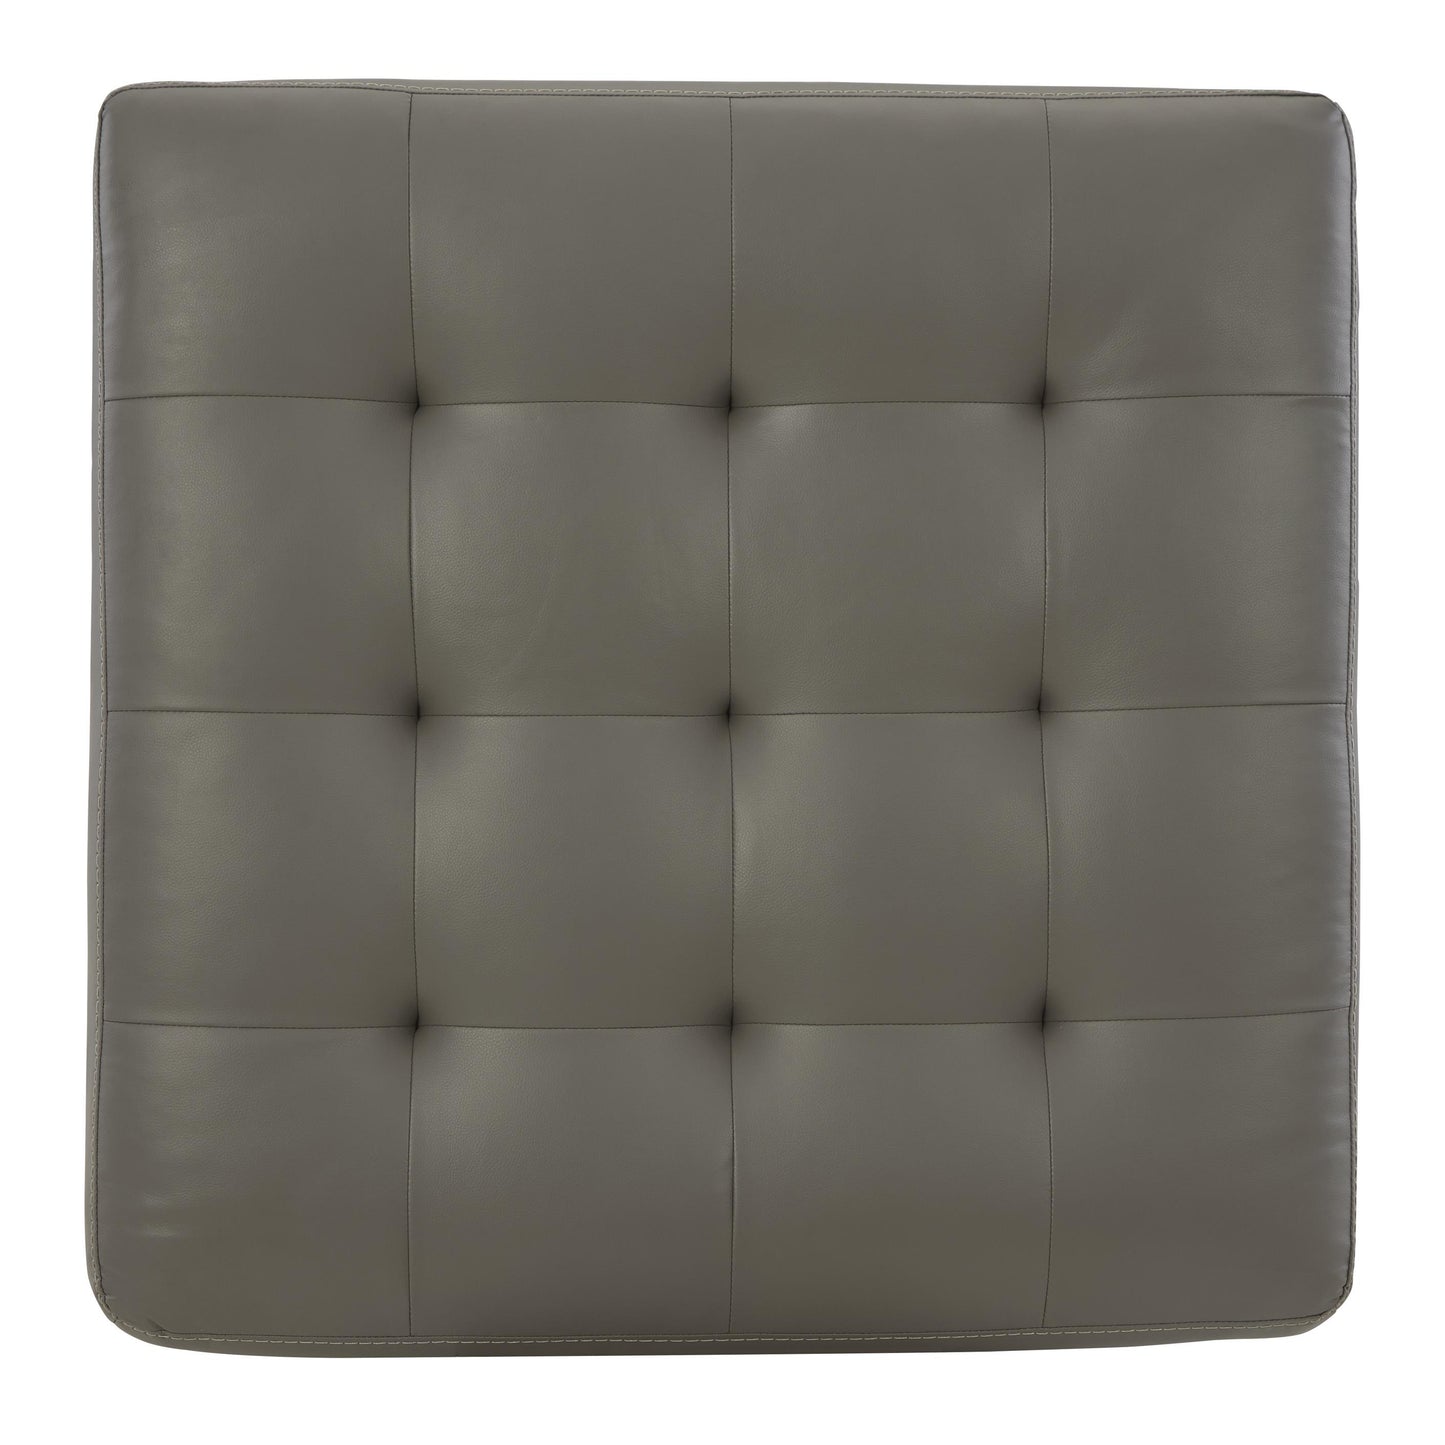 Signature Design by Ashley Donlen Leather Look Ottoman 5970208 IMAGE 3